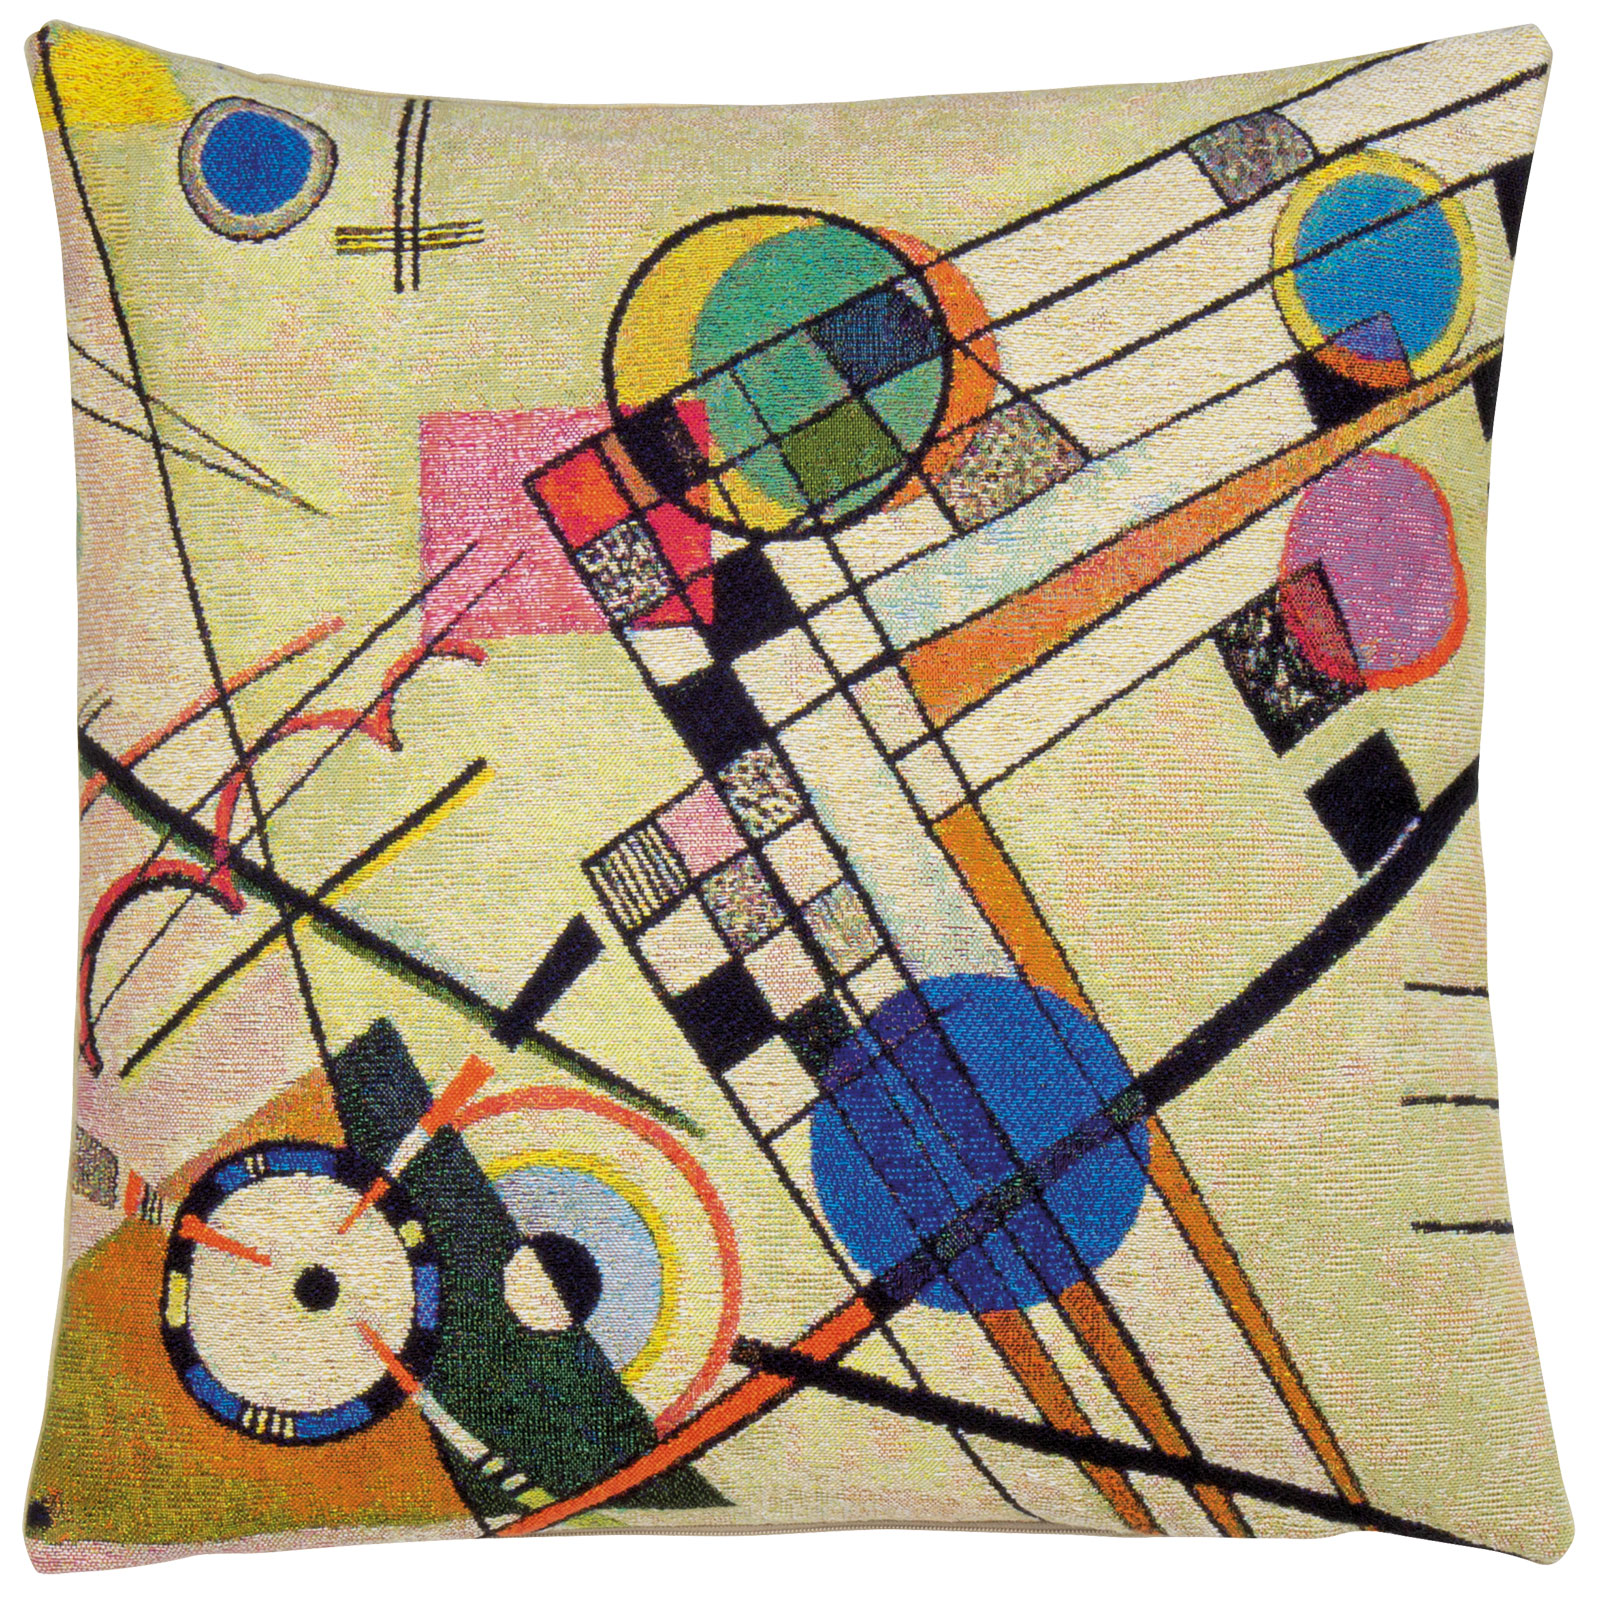 Cushion cover "Composition VIII C" by Wassily Kandinsky